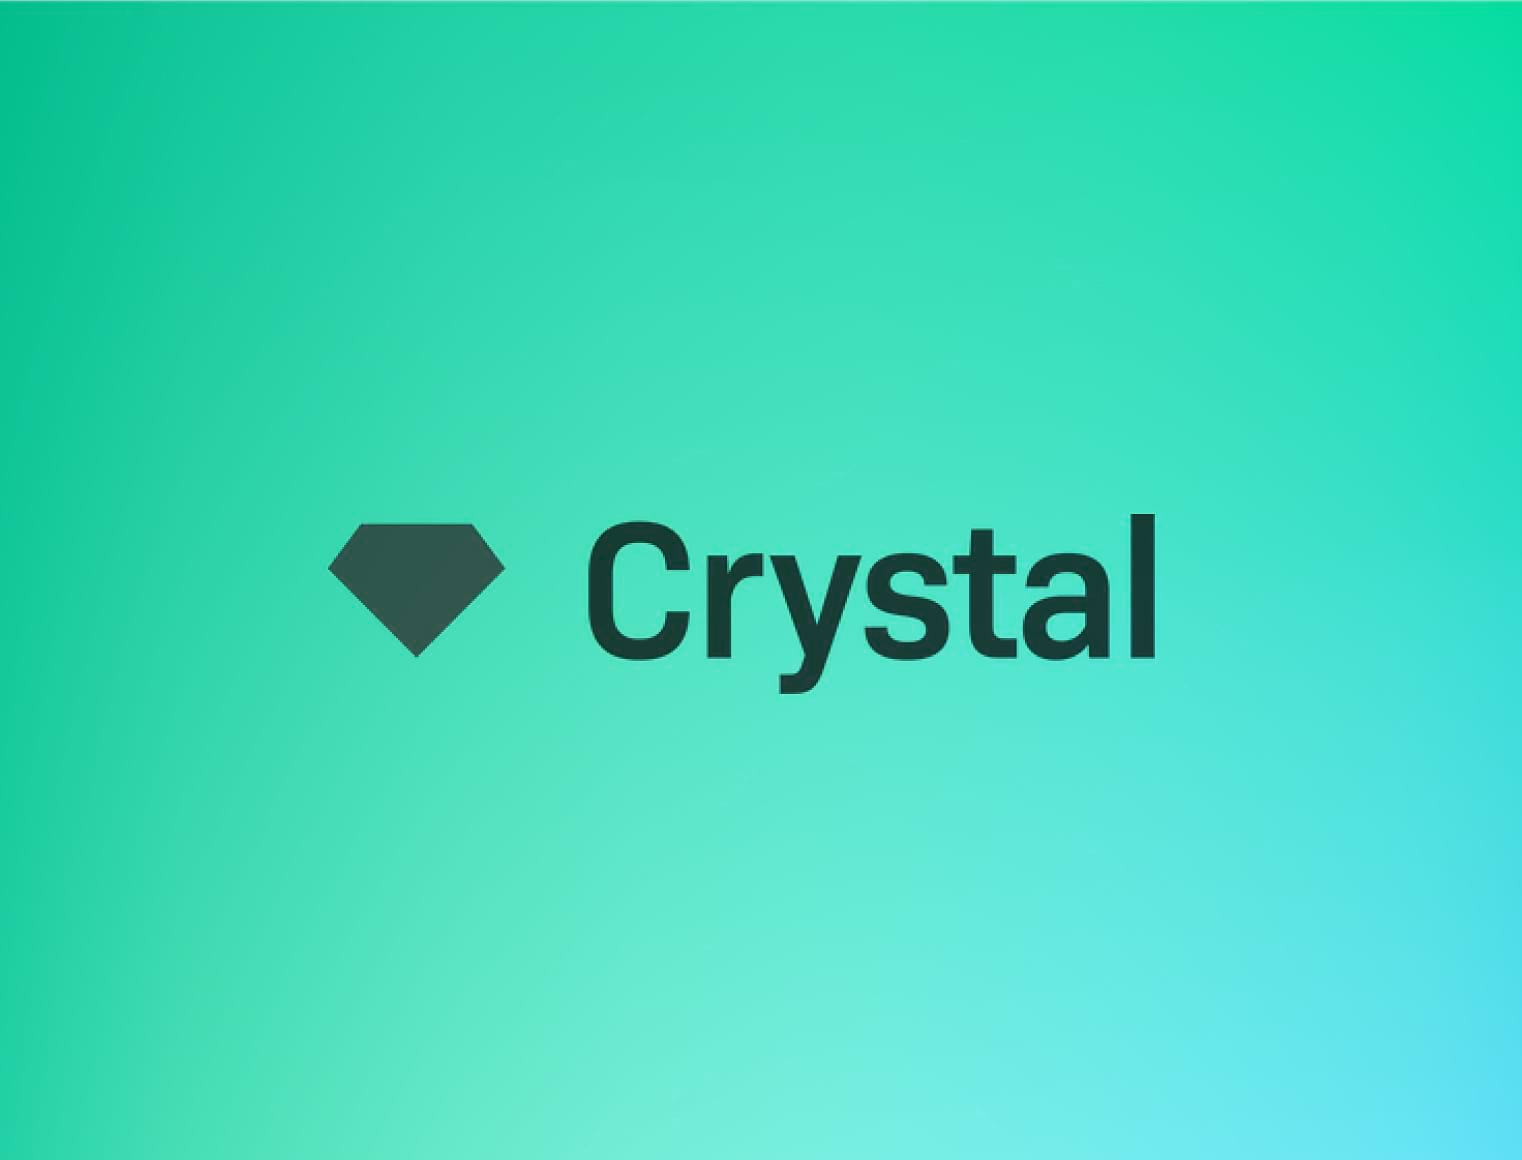 ETC Group Appoints Blockchain Analytics Leader, Crystal, To Provide Chain Analysis Services | ETC Group